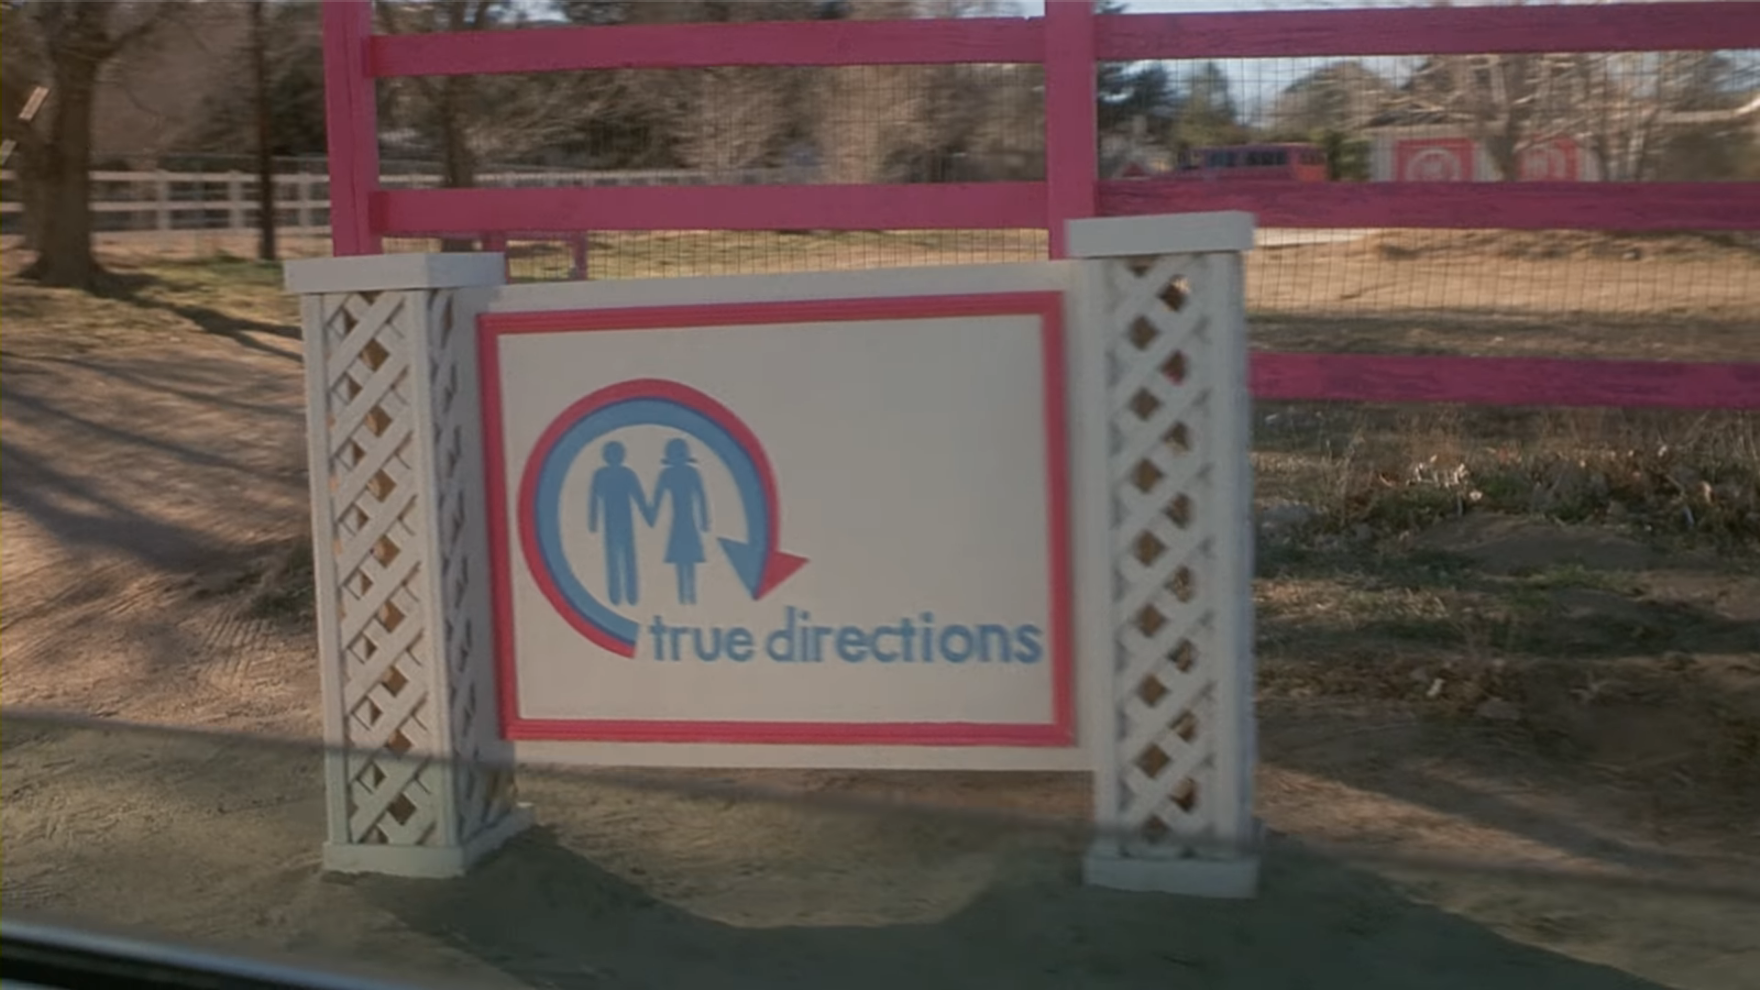 the sign in front of the true directions building, with the logo of 2 silouhettes representing men and women inside a pink and blue arrow in the shape of a circle